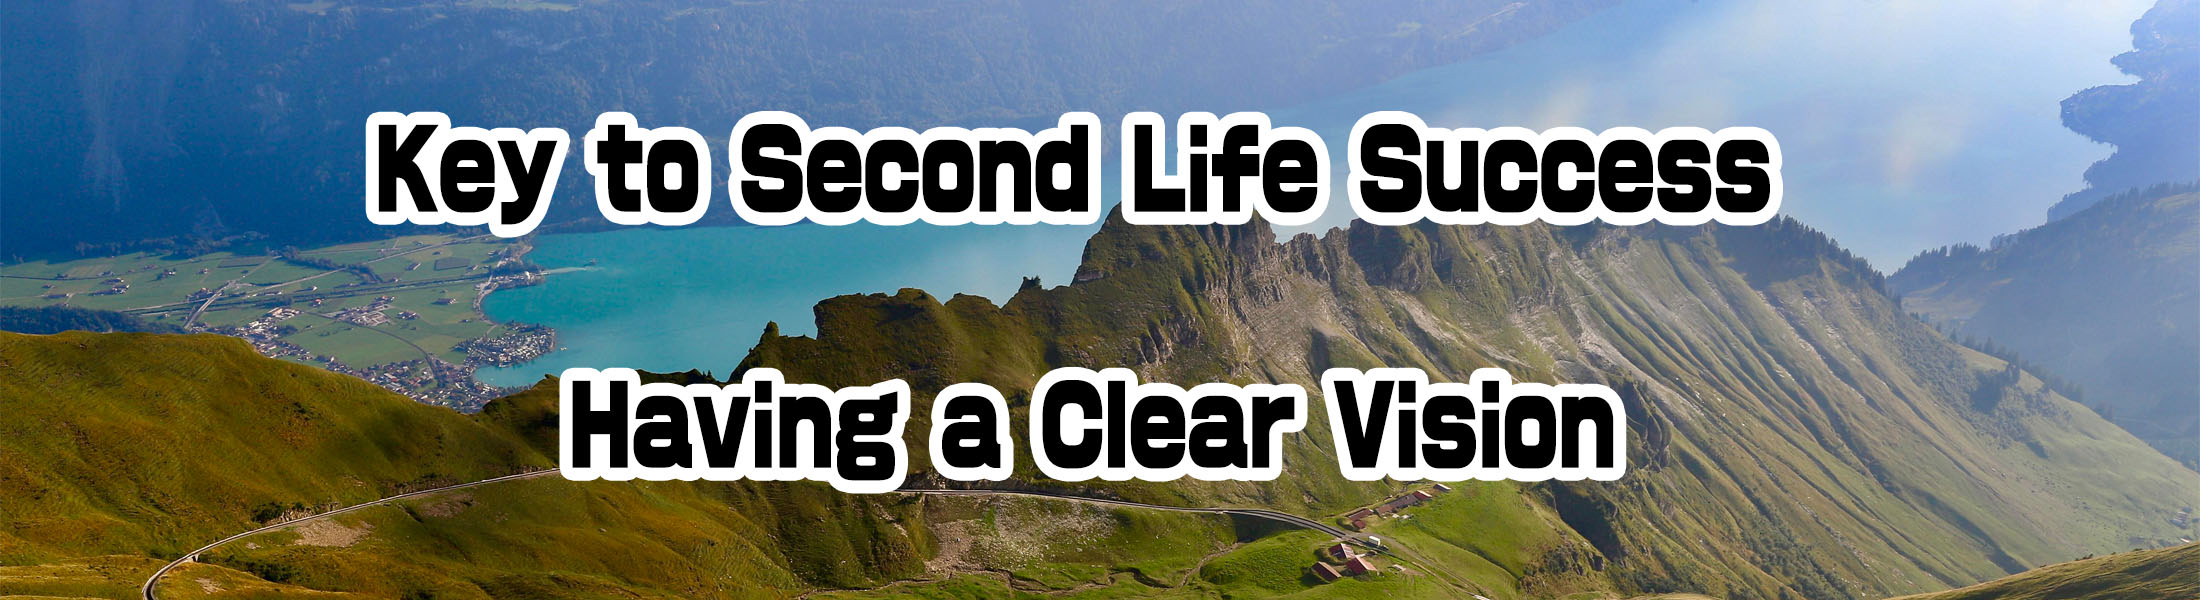 Key to Second Life Success: Having a Clear Vision